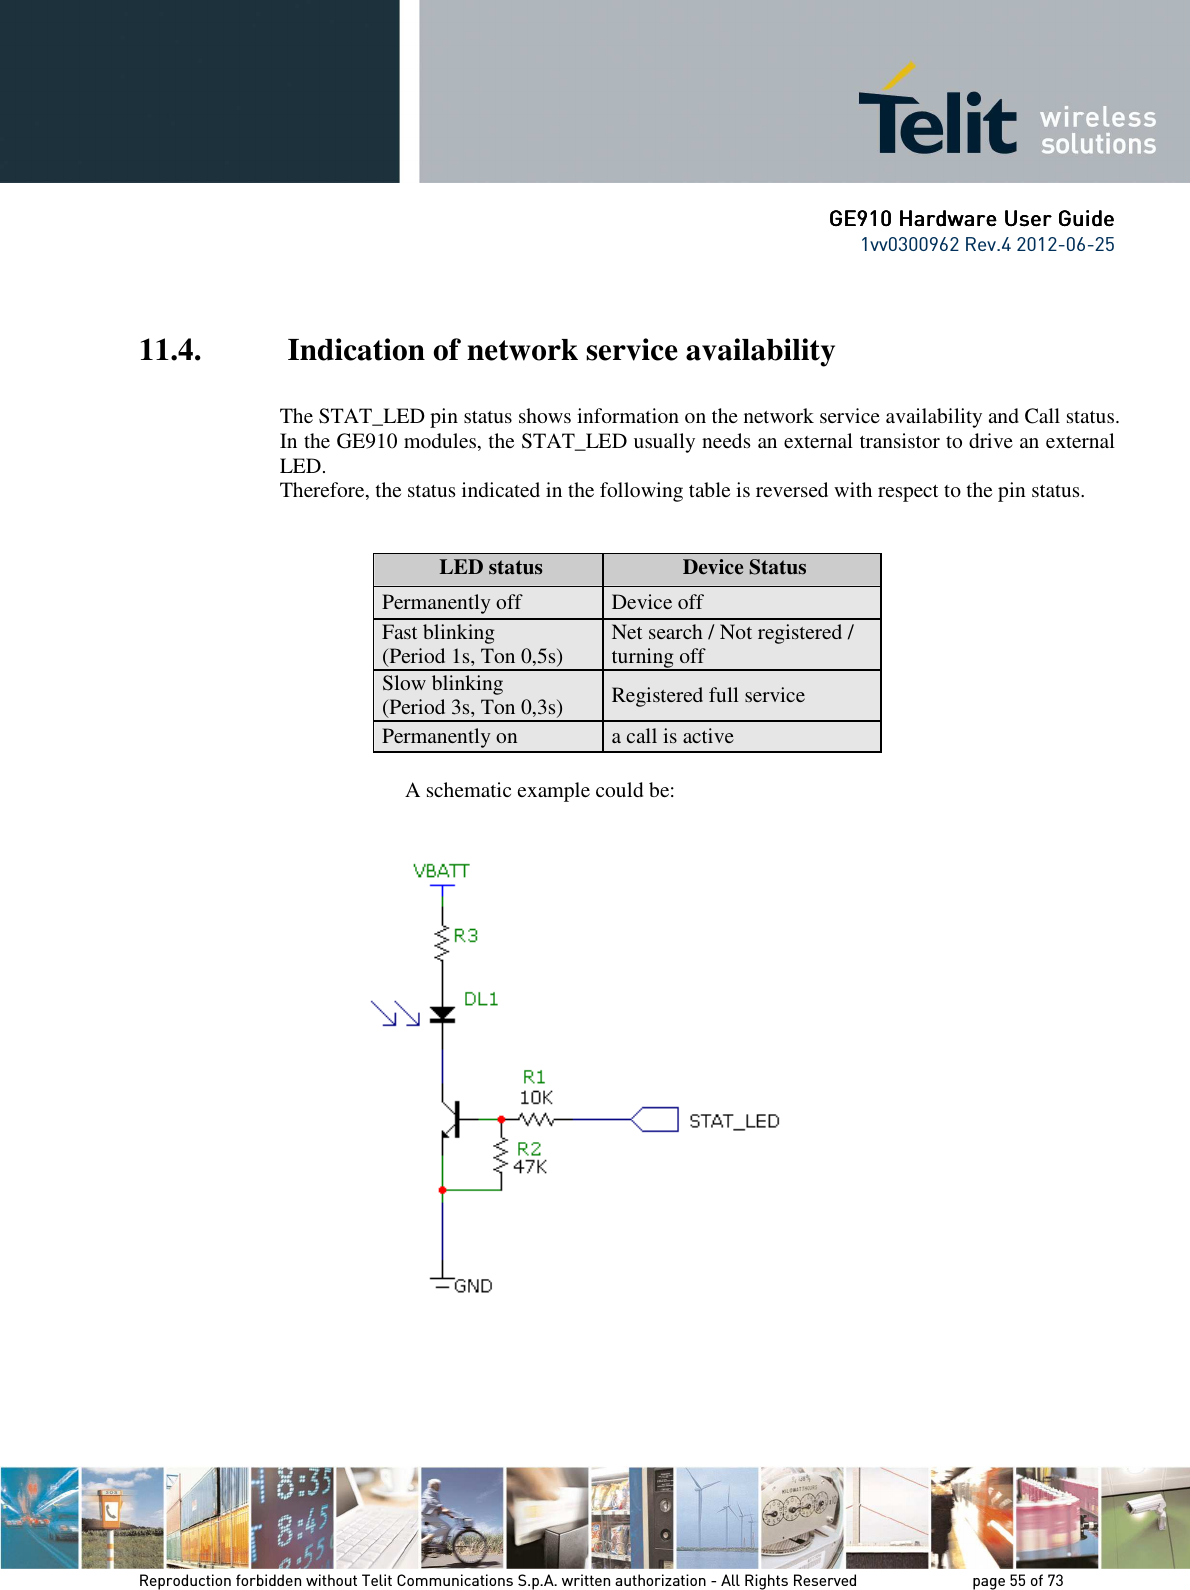      GE9GE9GE9GE910 Hardware User Guide10 Hardware User Guide10 Hardware User Guide10 Hardware User Guide    1vv0300962 Rev.4 2012-06-25    Reproduction forbidden without Telit Communications S.p.A. written authorization - All Rights Reserved    page 55 of 73 Mod. 0805 2011-07 Rev.2  11.4.  Indication of network service availability  The STAT_LED pin status shows information on the network service availability and Call status.  In the GE910 modules, the STAT_LED usually needs an external transistor to drive an external LED. Therefore, the status indicated in the following table is reversed with respect to the pin status.              LED status  Device Status Permanently off  Device off Fast blinking (Period 1s, Ton 0,5s)  Net search / Not registered / turning off Slow blinking (Period 3s, Ton 0,3s)  Registered full service Permanently on  a call is active        A schematic example could be:        